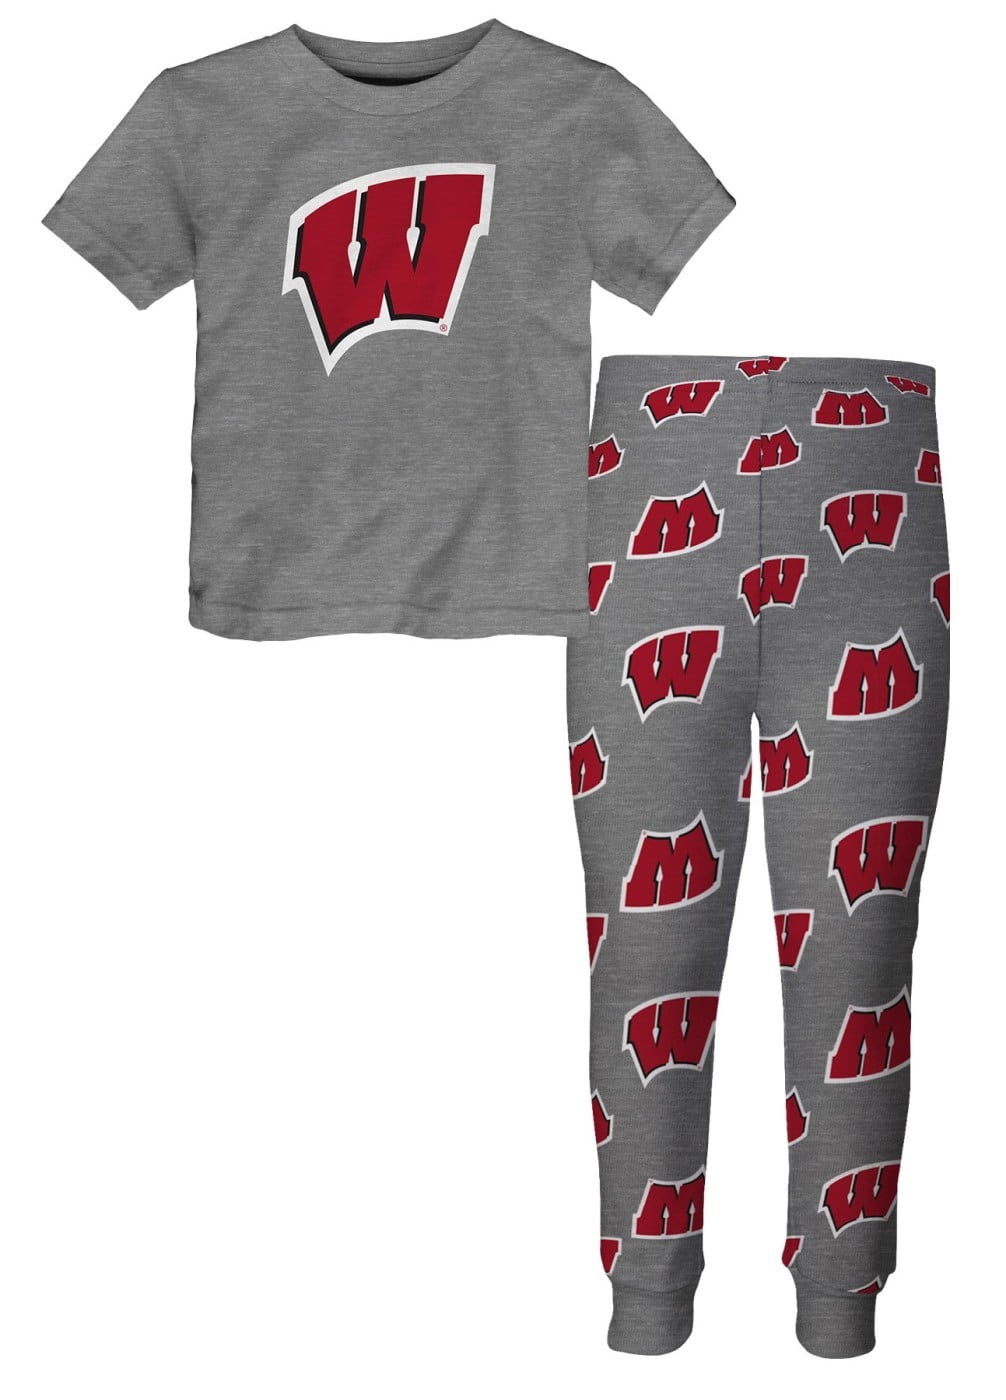 New Wisconsin Badgers Toddler Boy's 2-piece Set of Polyester Shirt and Shorts 